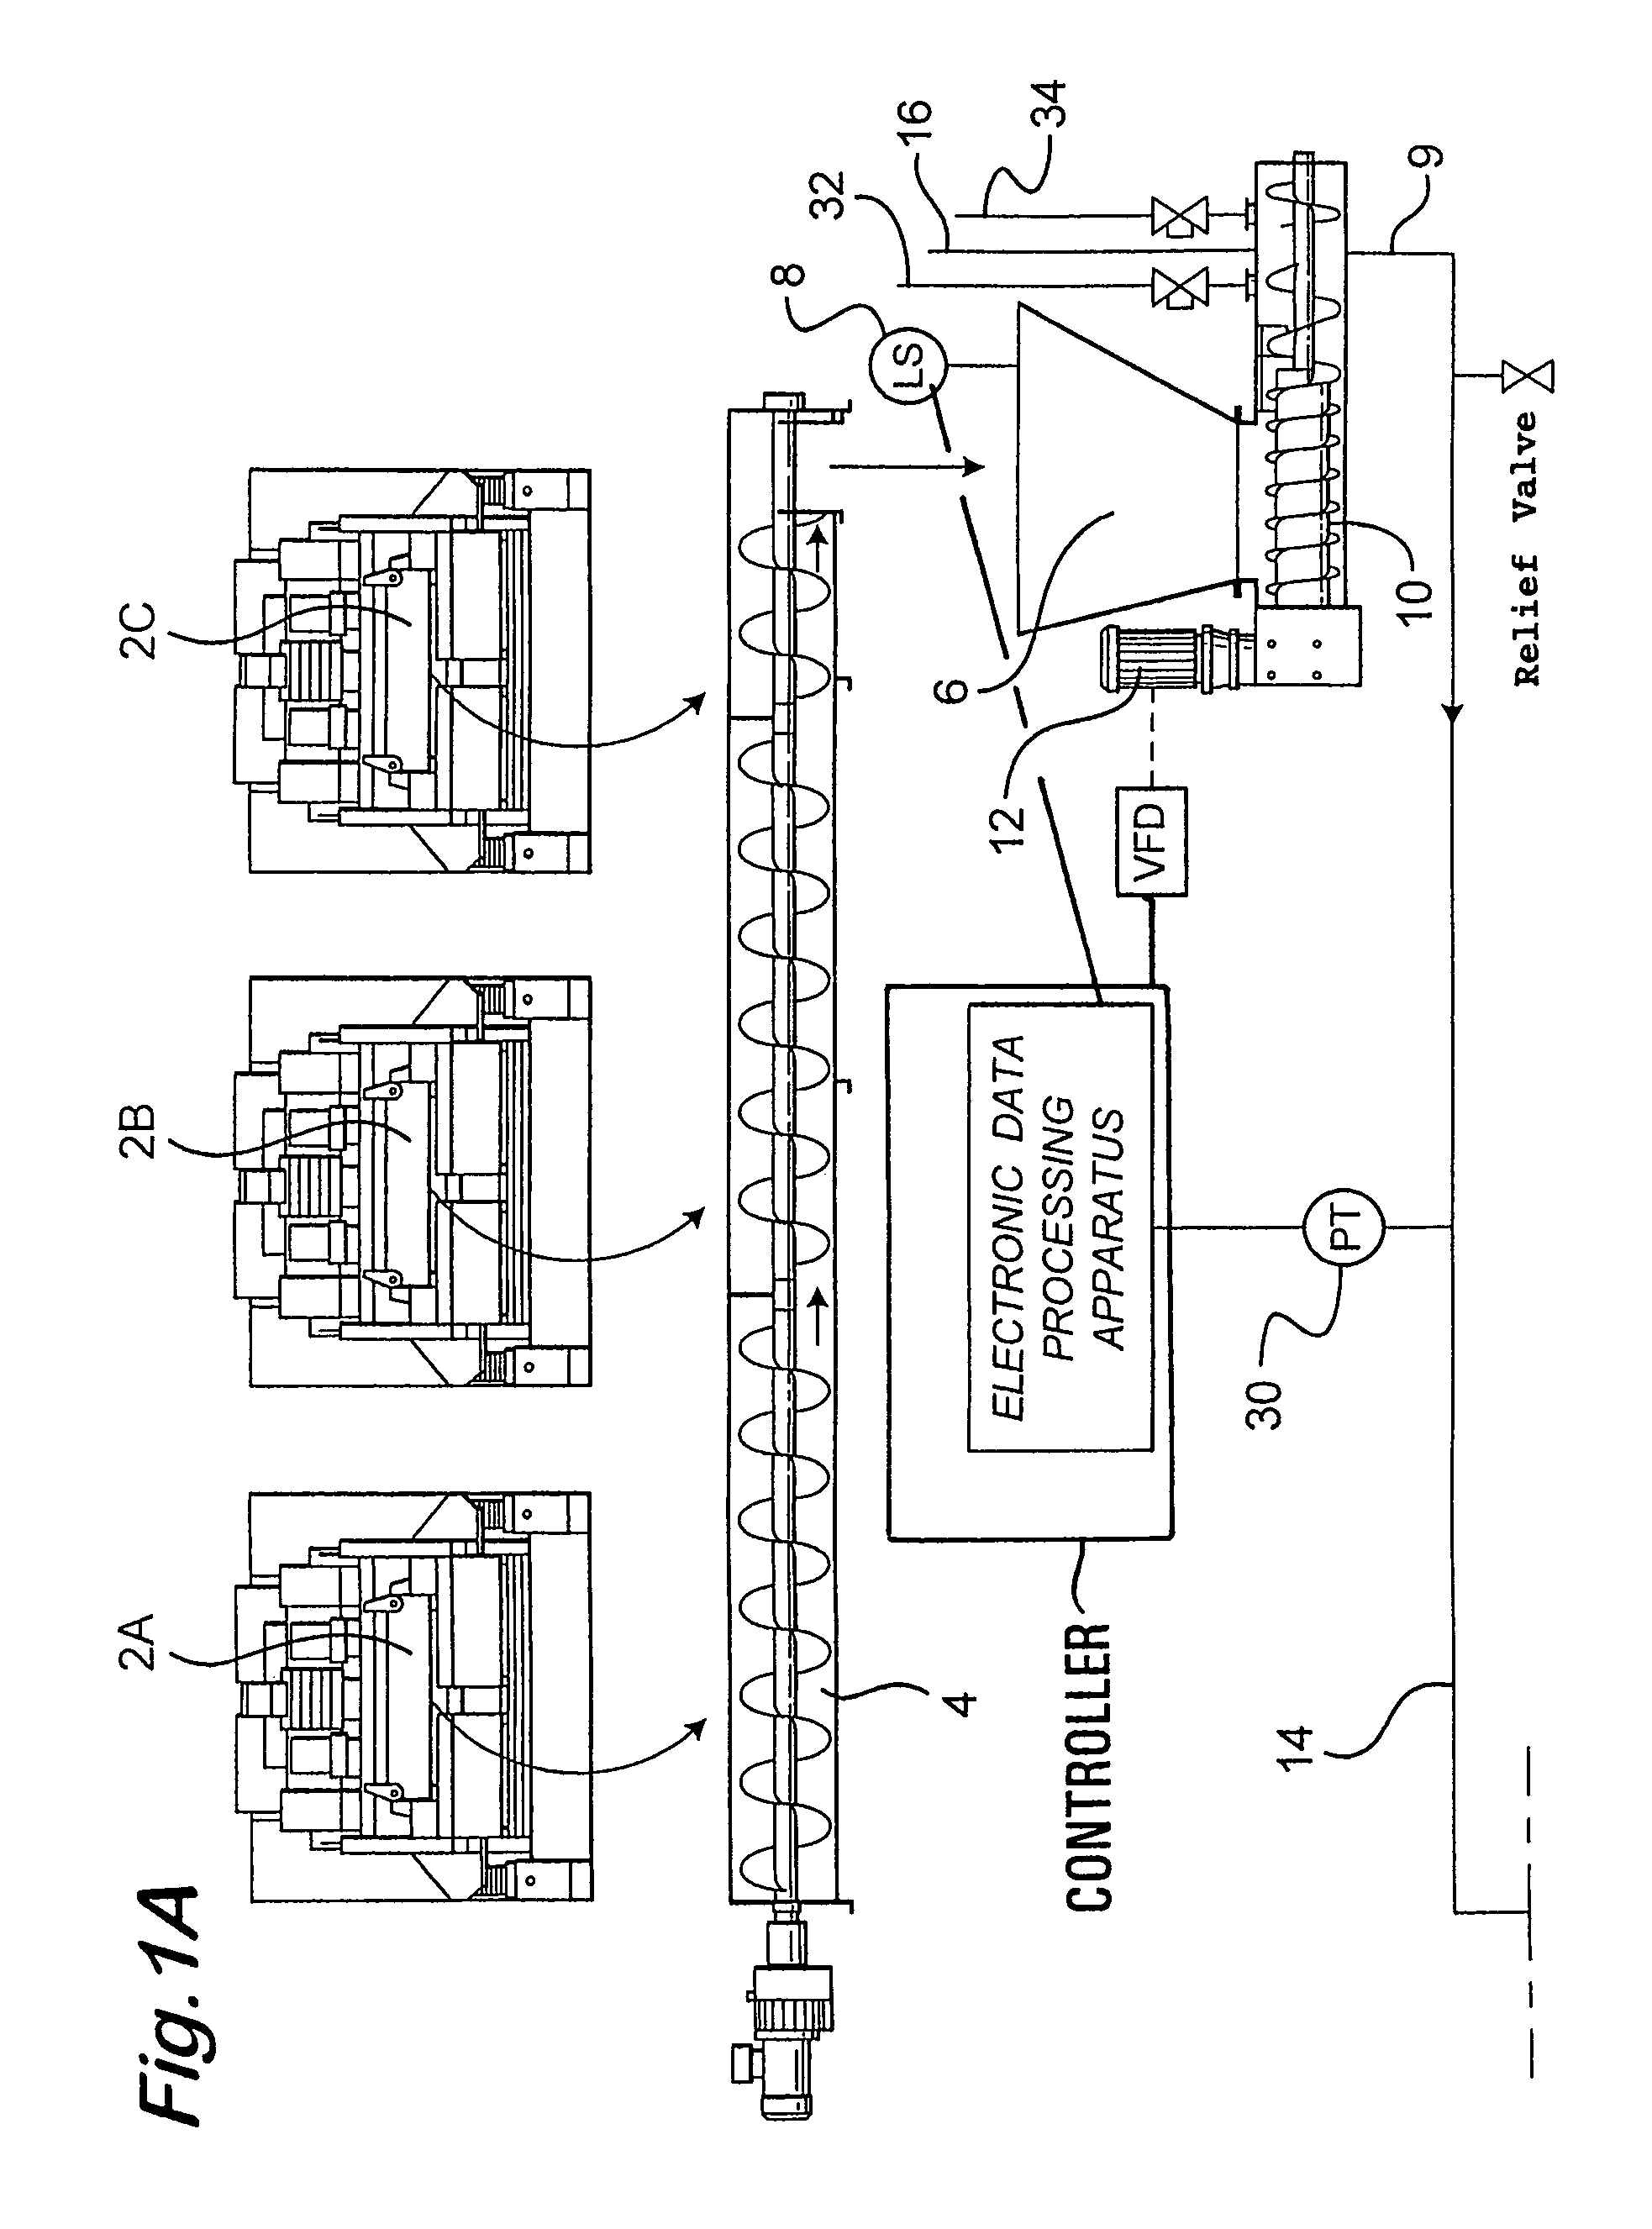 Apparatus and method for transporting waste materials